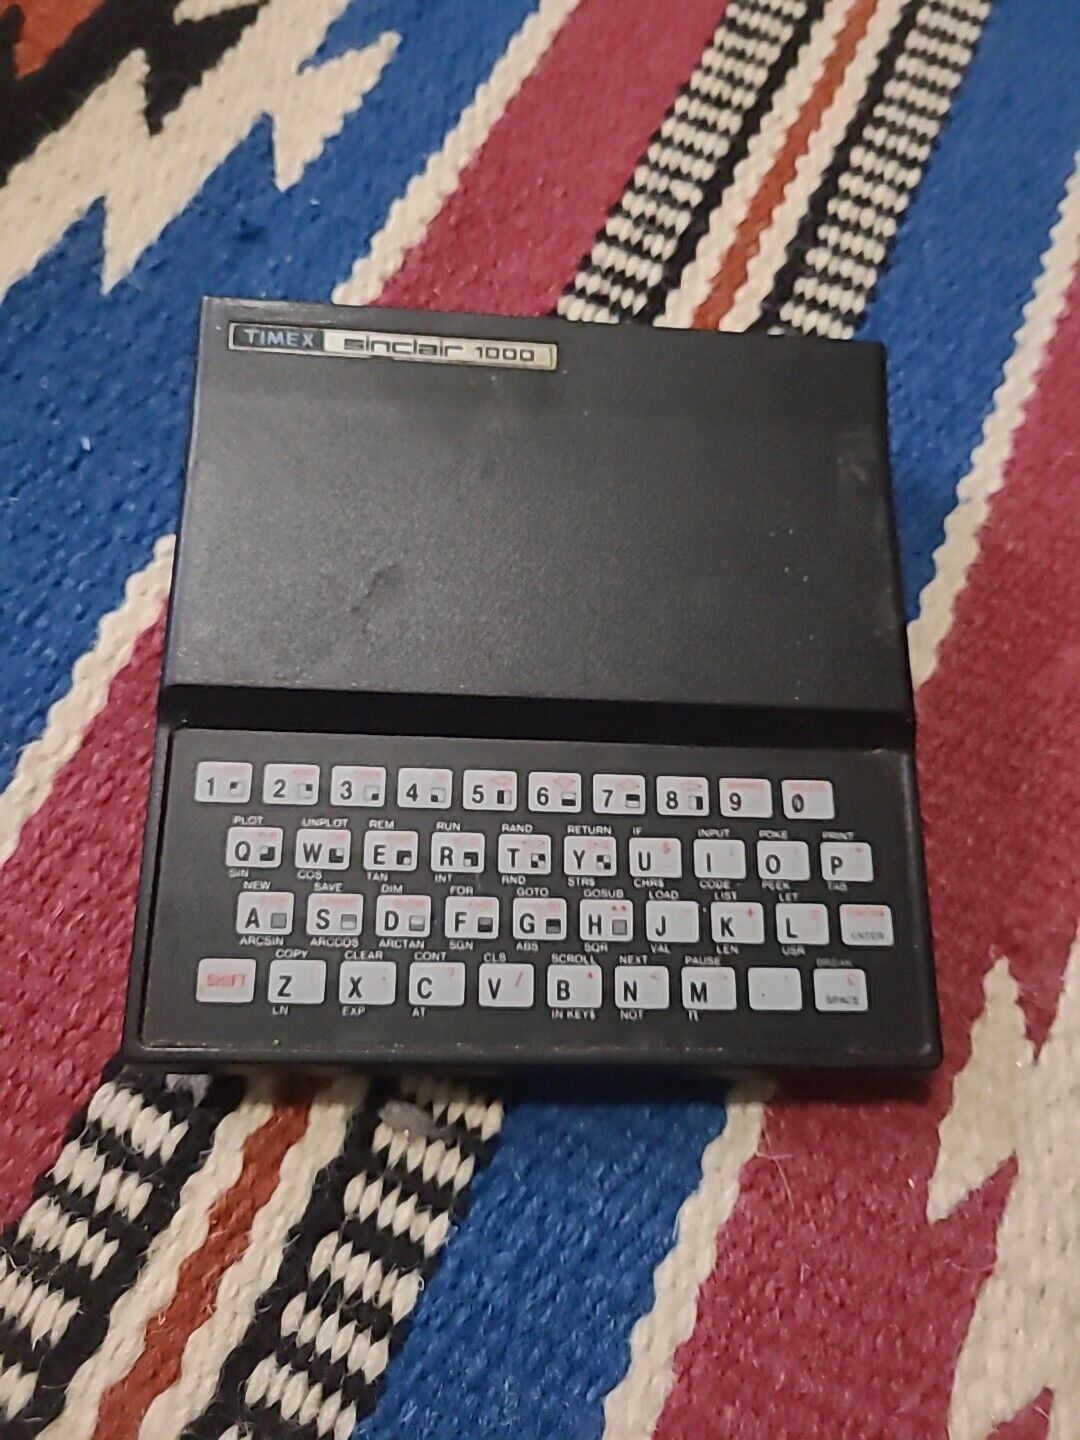 Timex Sinclair 1000 Personal Computer - Vintage Untested No Power Adapter